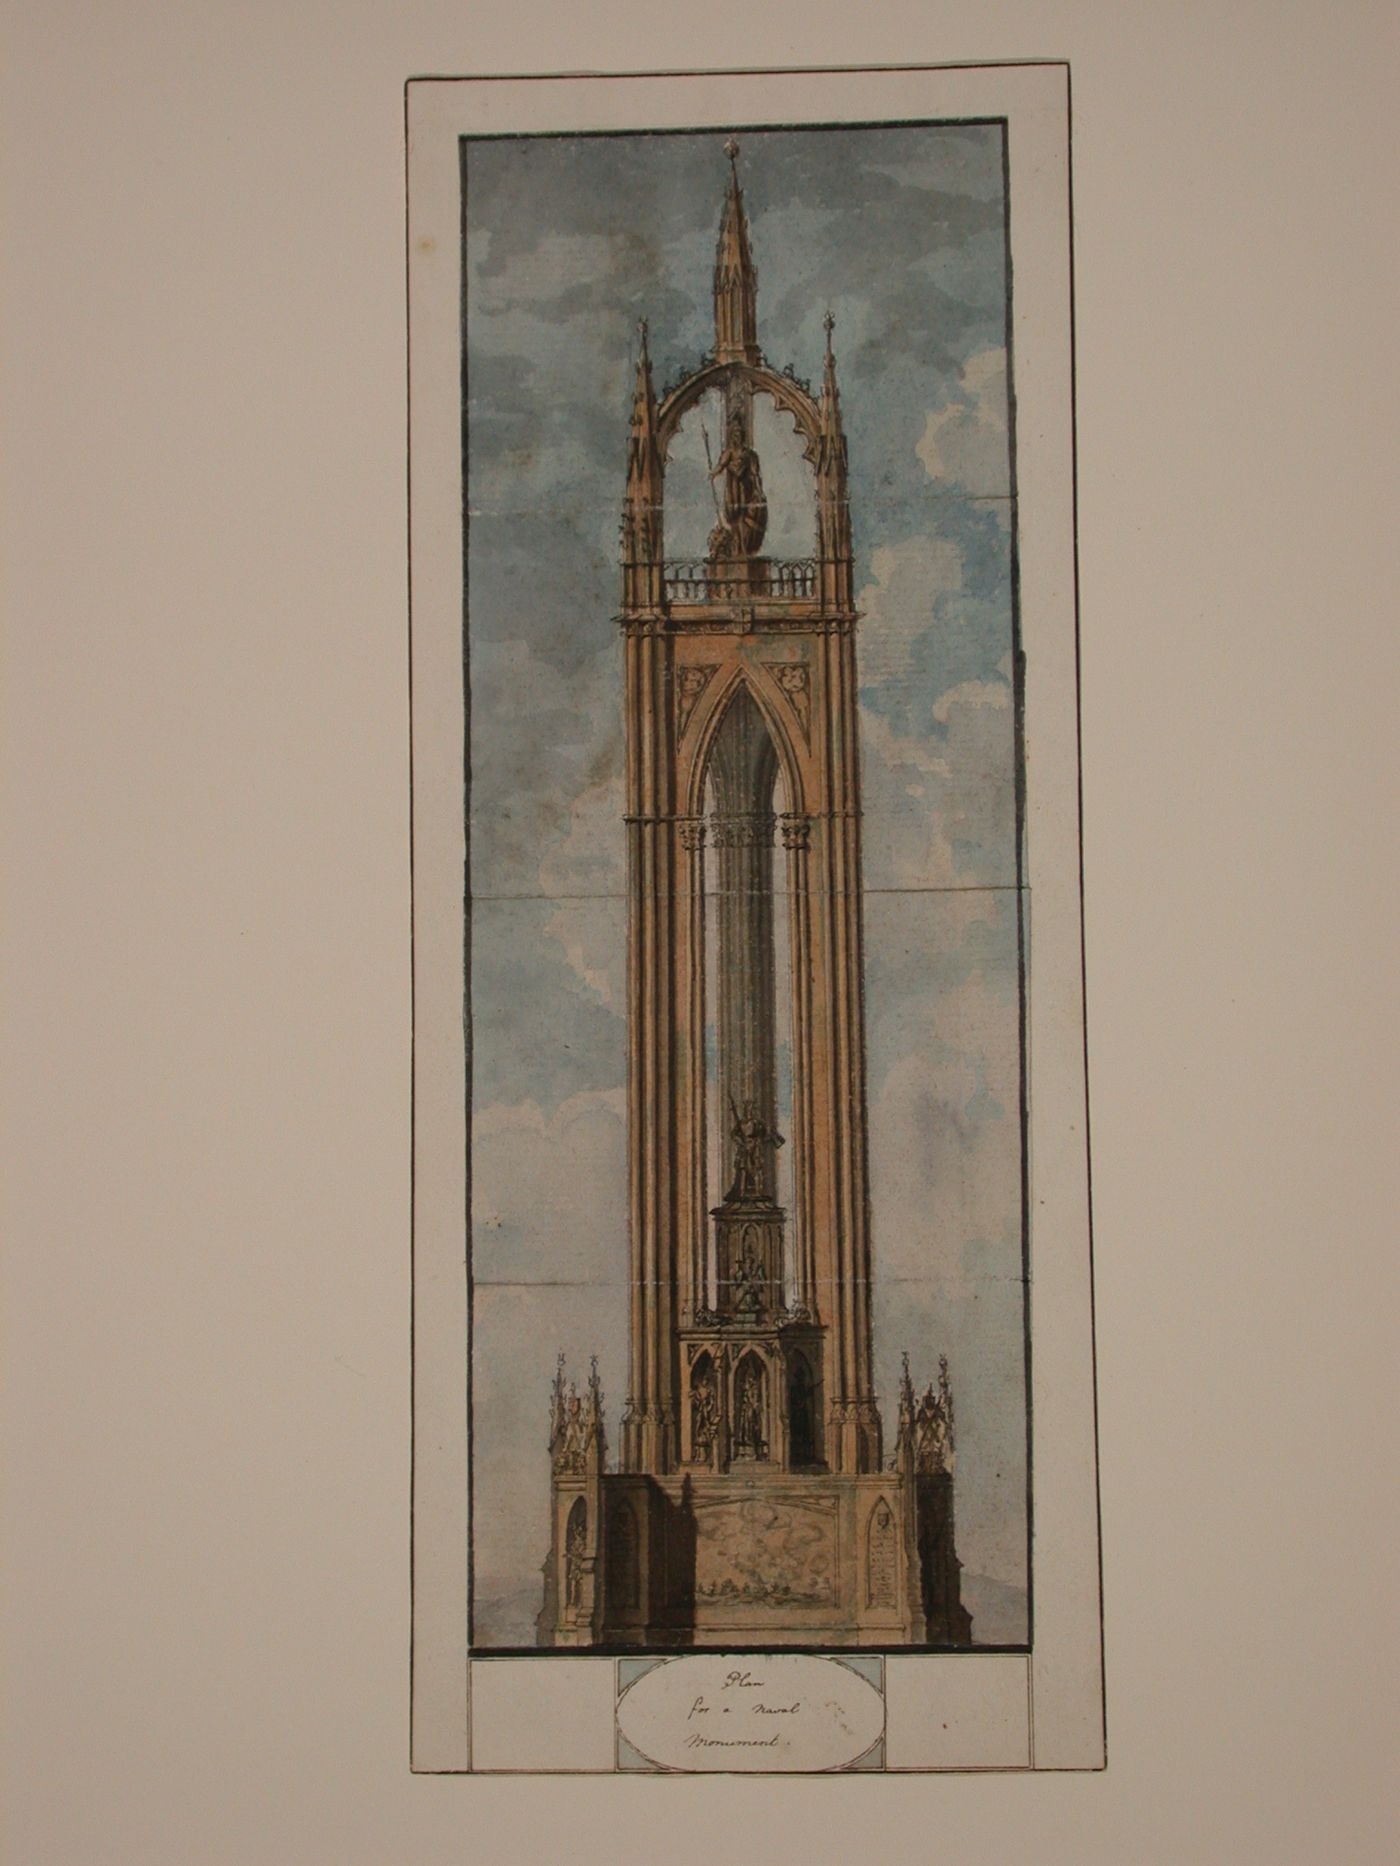 Design for a naval monument